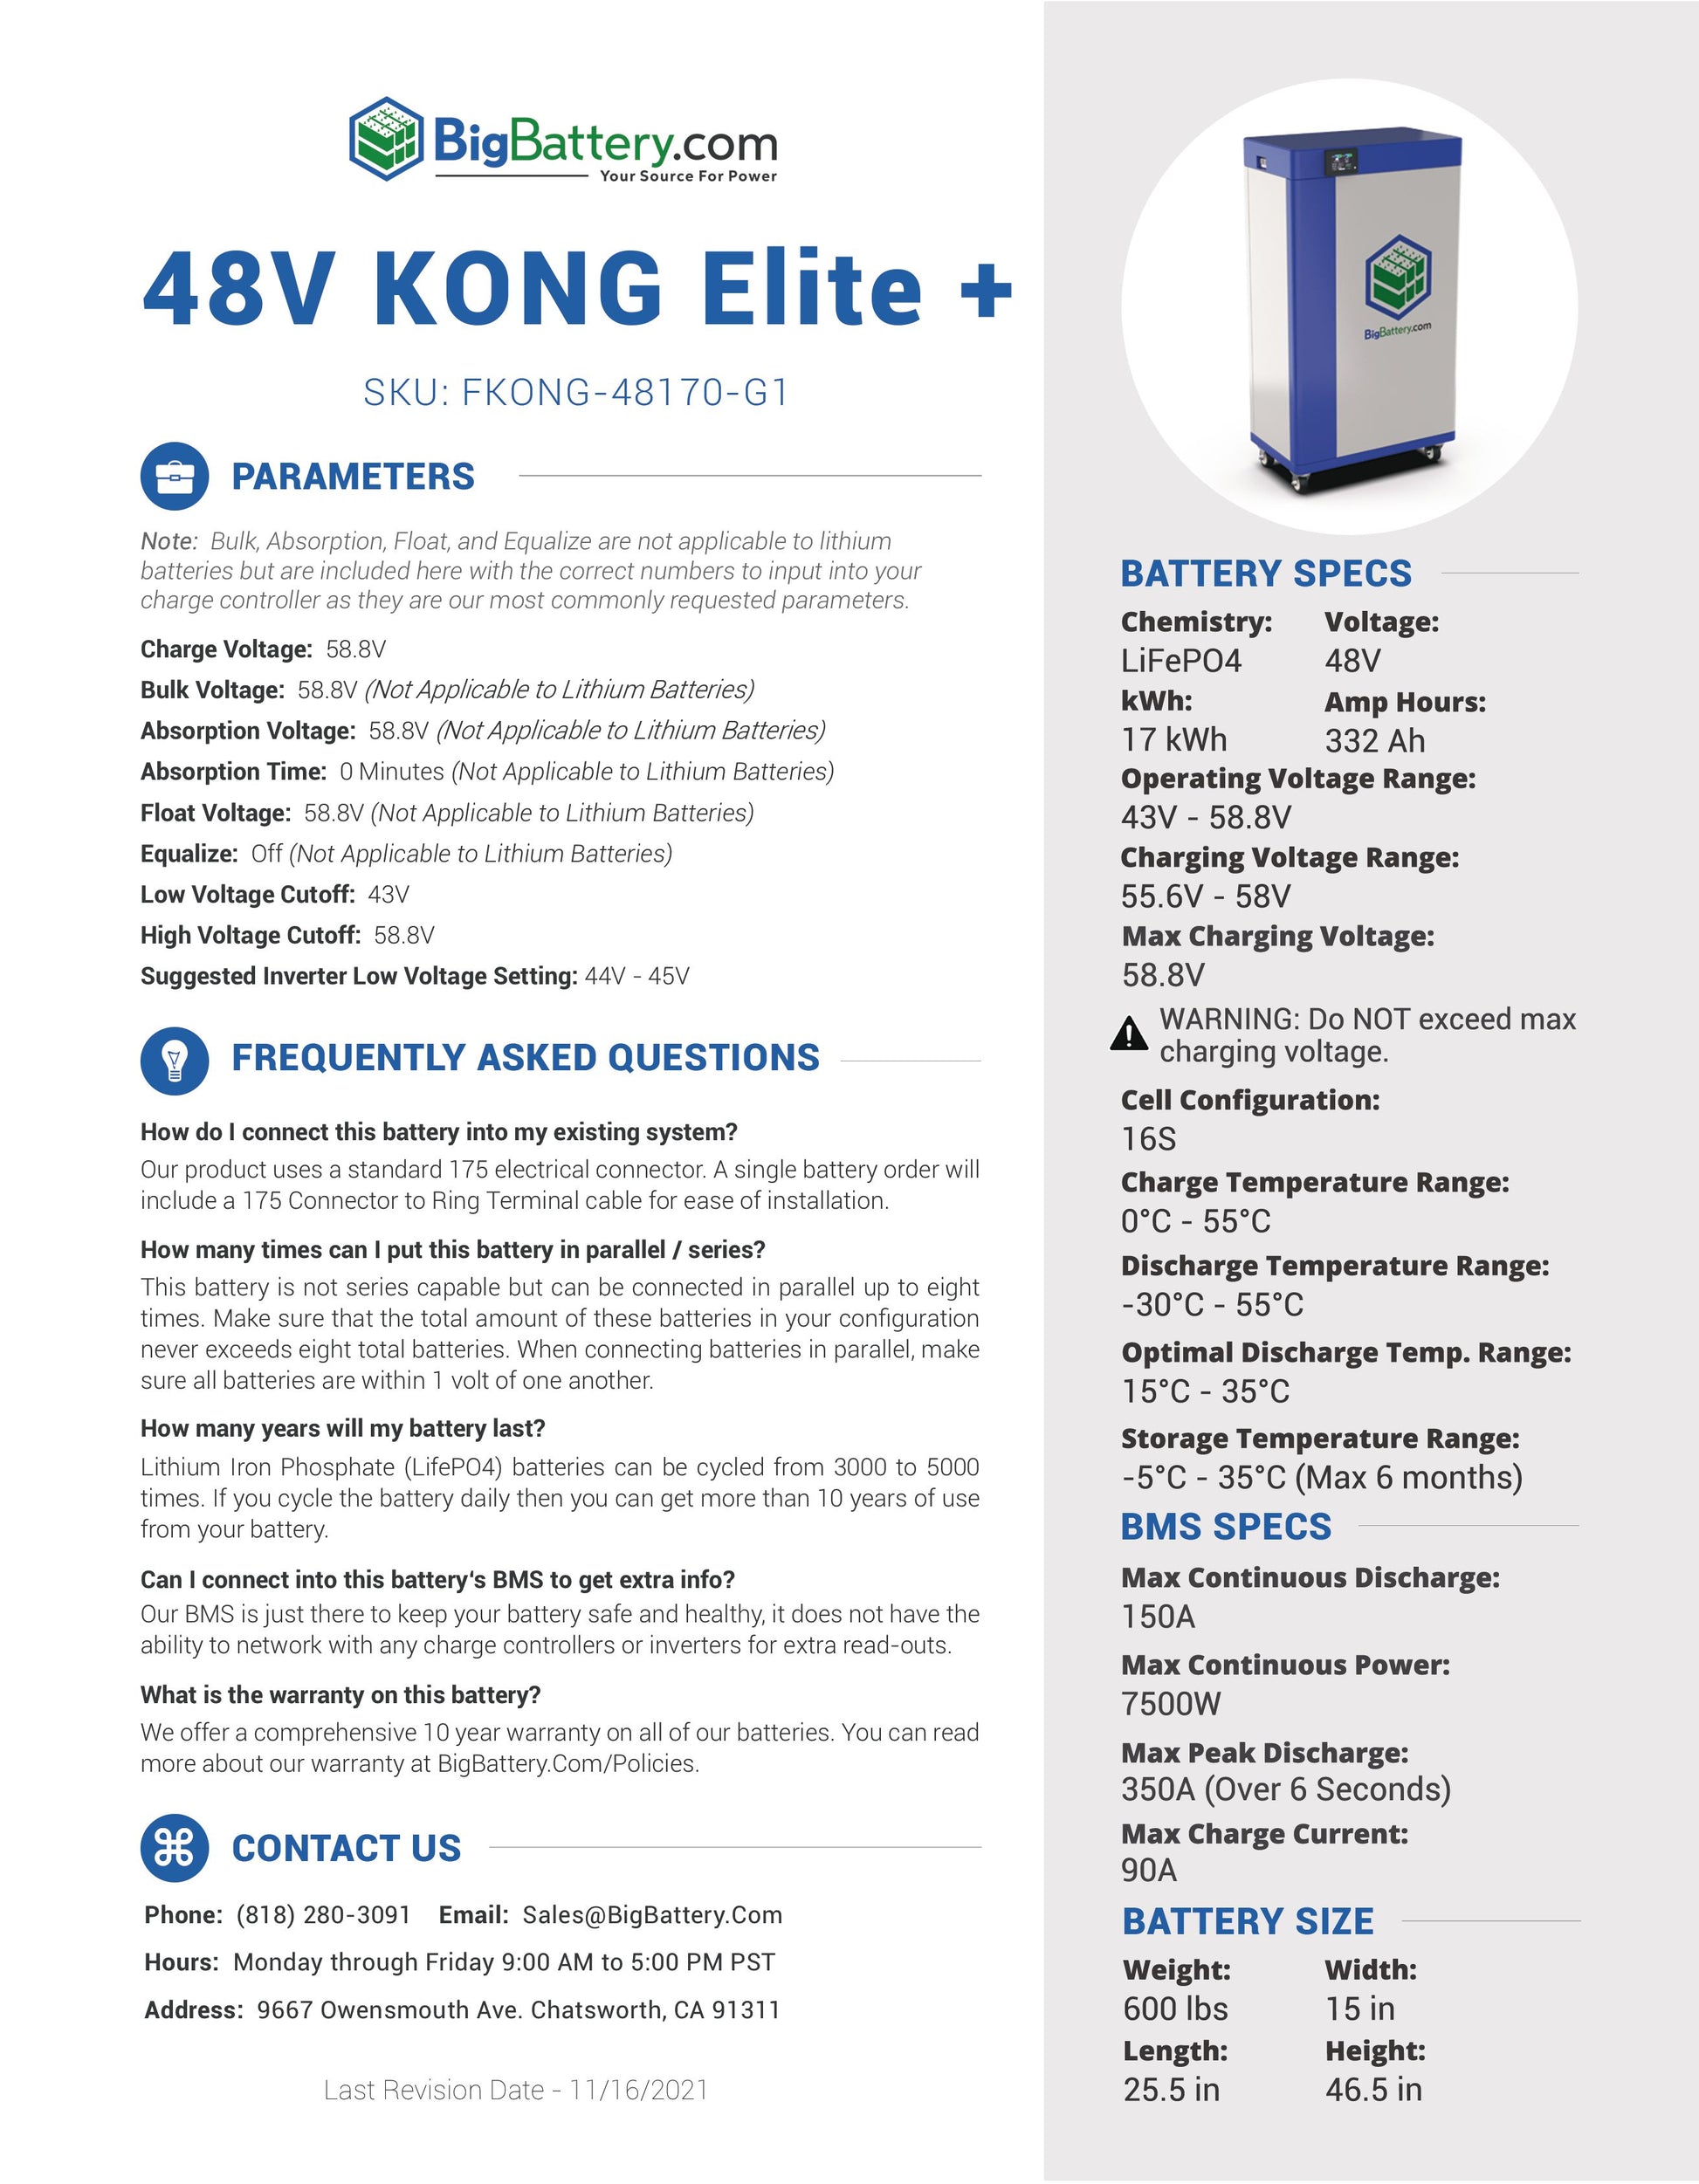 48V KONG ELITE PLUS｜332Ah｜17.0kWh｜LIFEPO4 Power Block｜Lithium Battery Pack｜Currently On Backorder